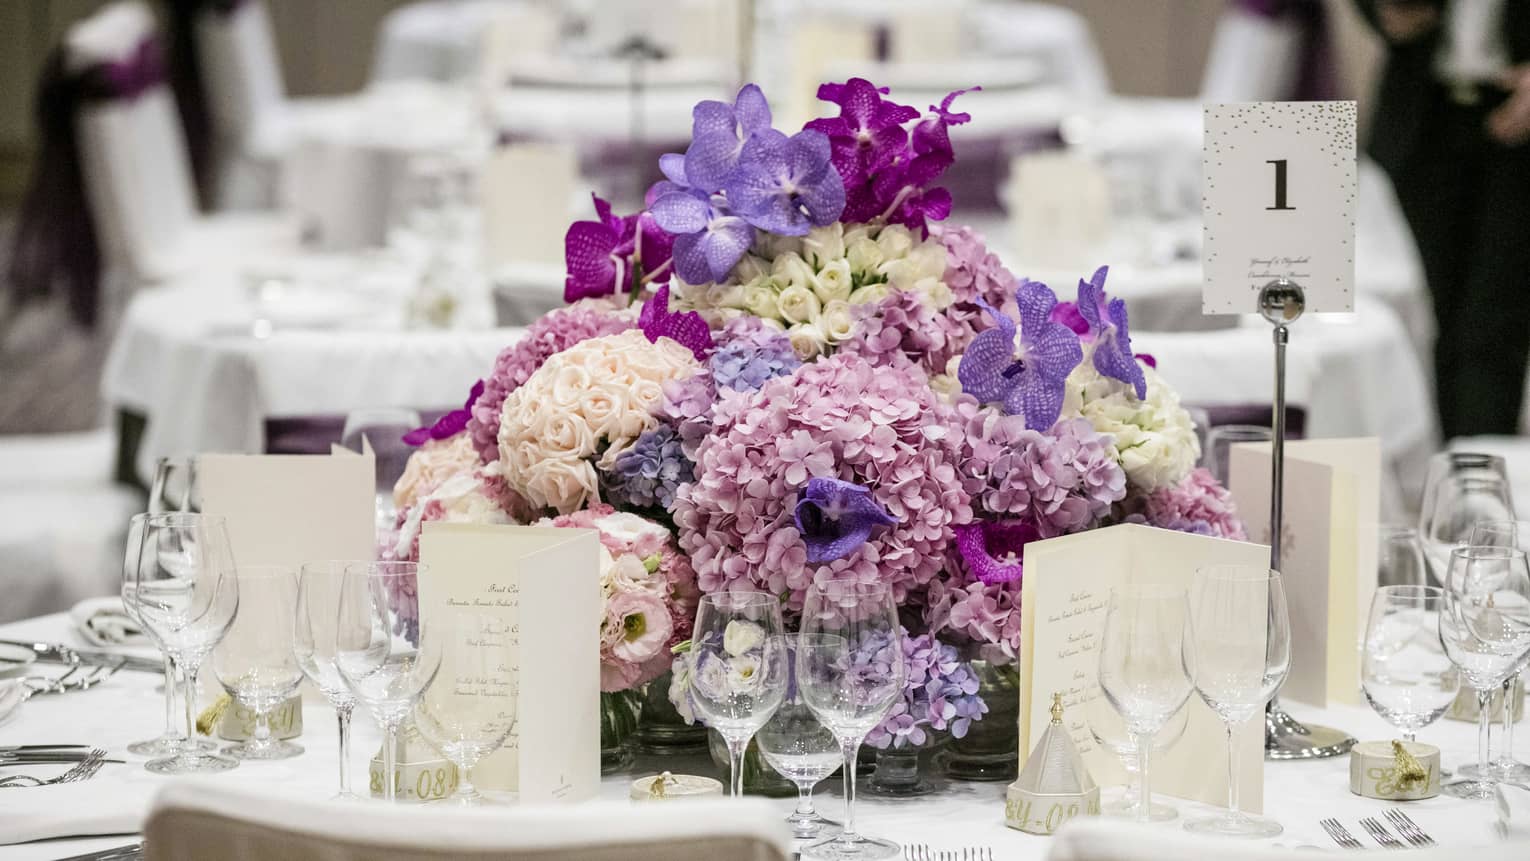 Wedding reception table setting with pink and purple floral centrepiece